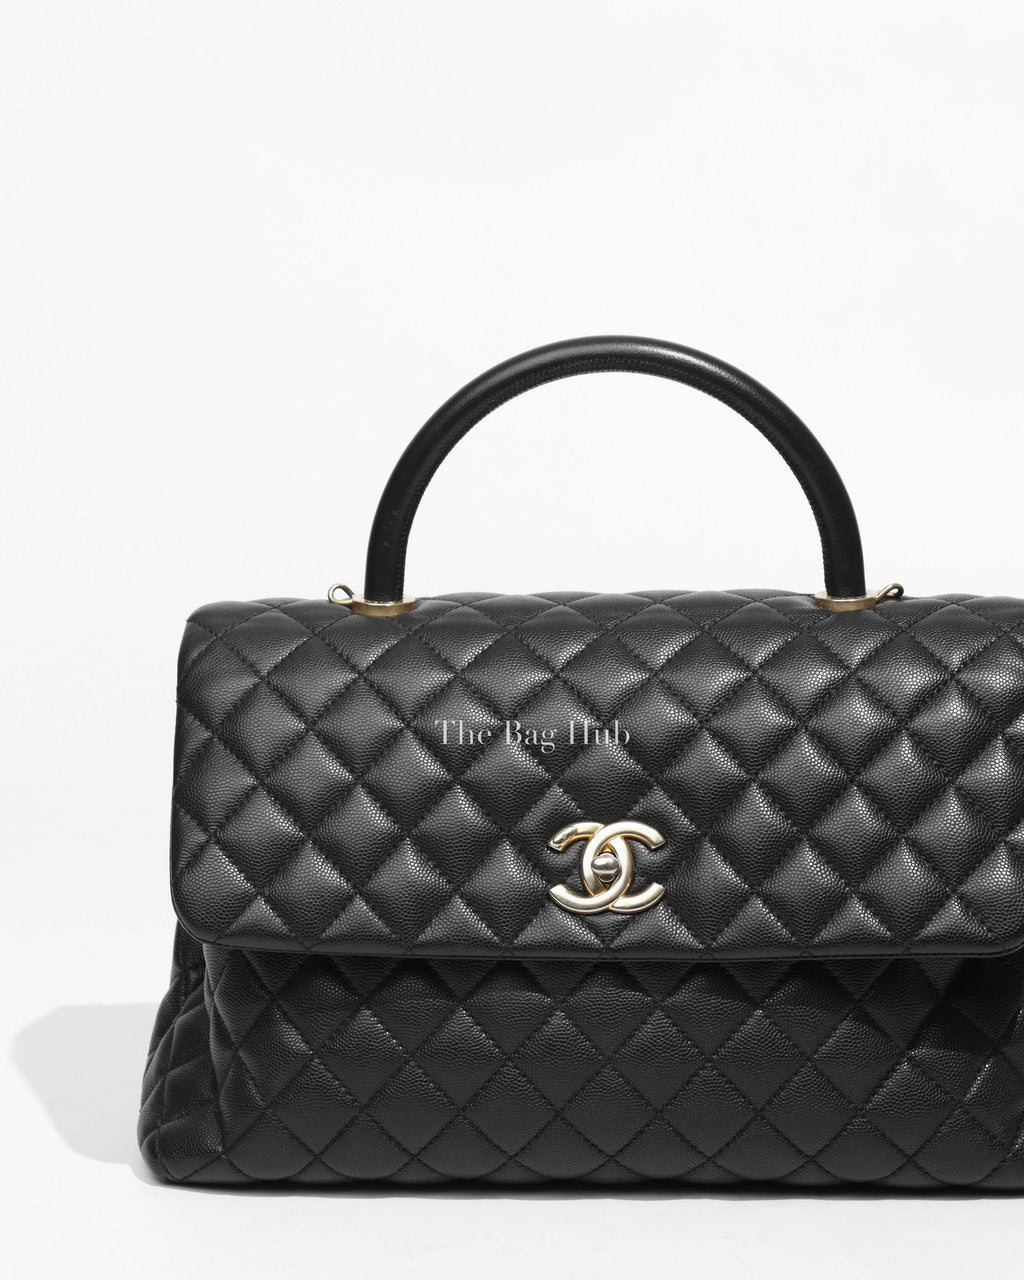 Chanel Black Caviar Leather Large Coco Handle Bag GHW-1